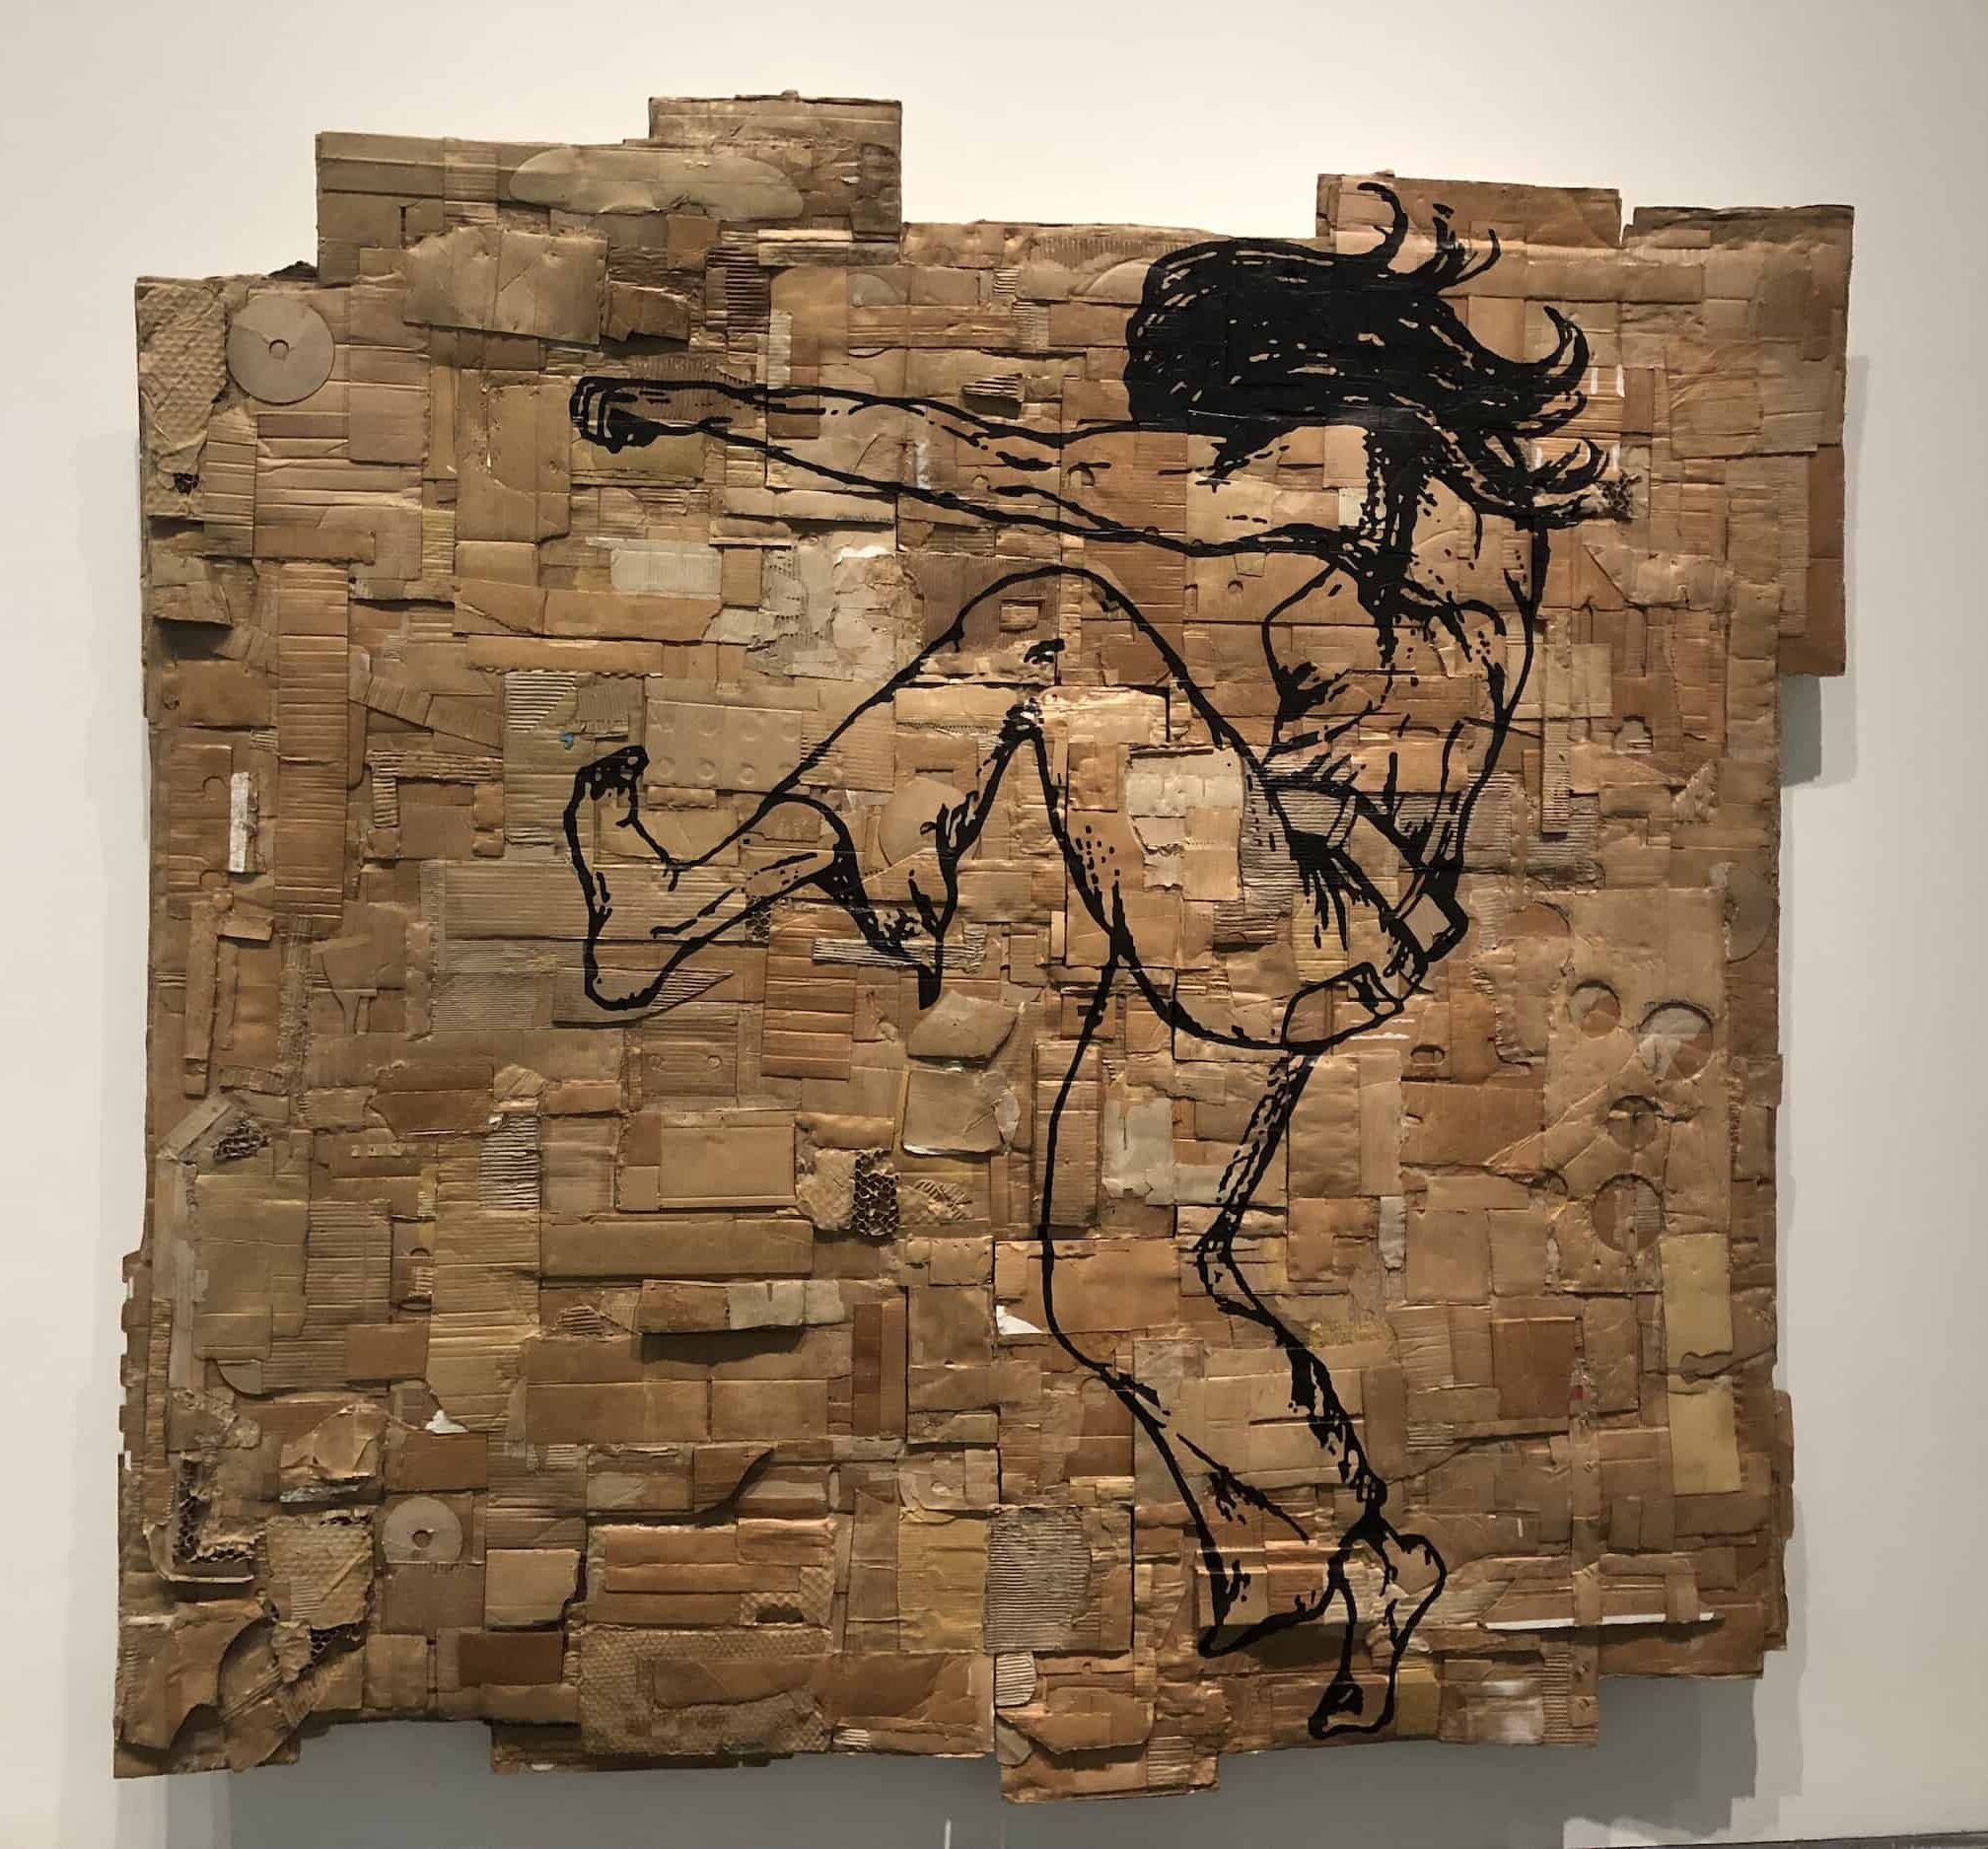 Cardboard work on women's rights in the Andrea Bowers exhibition